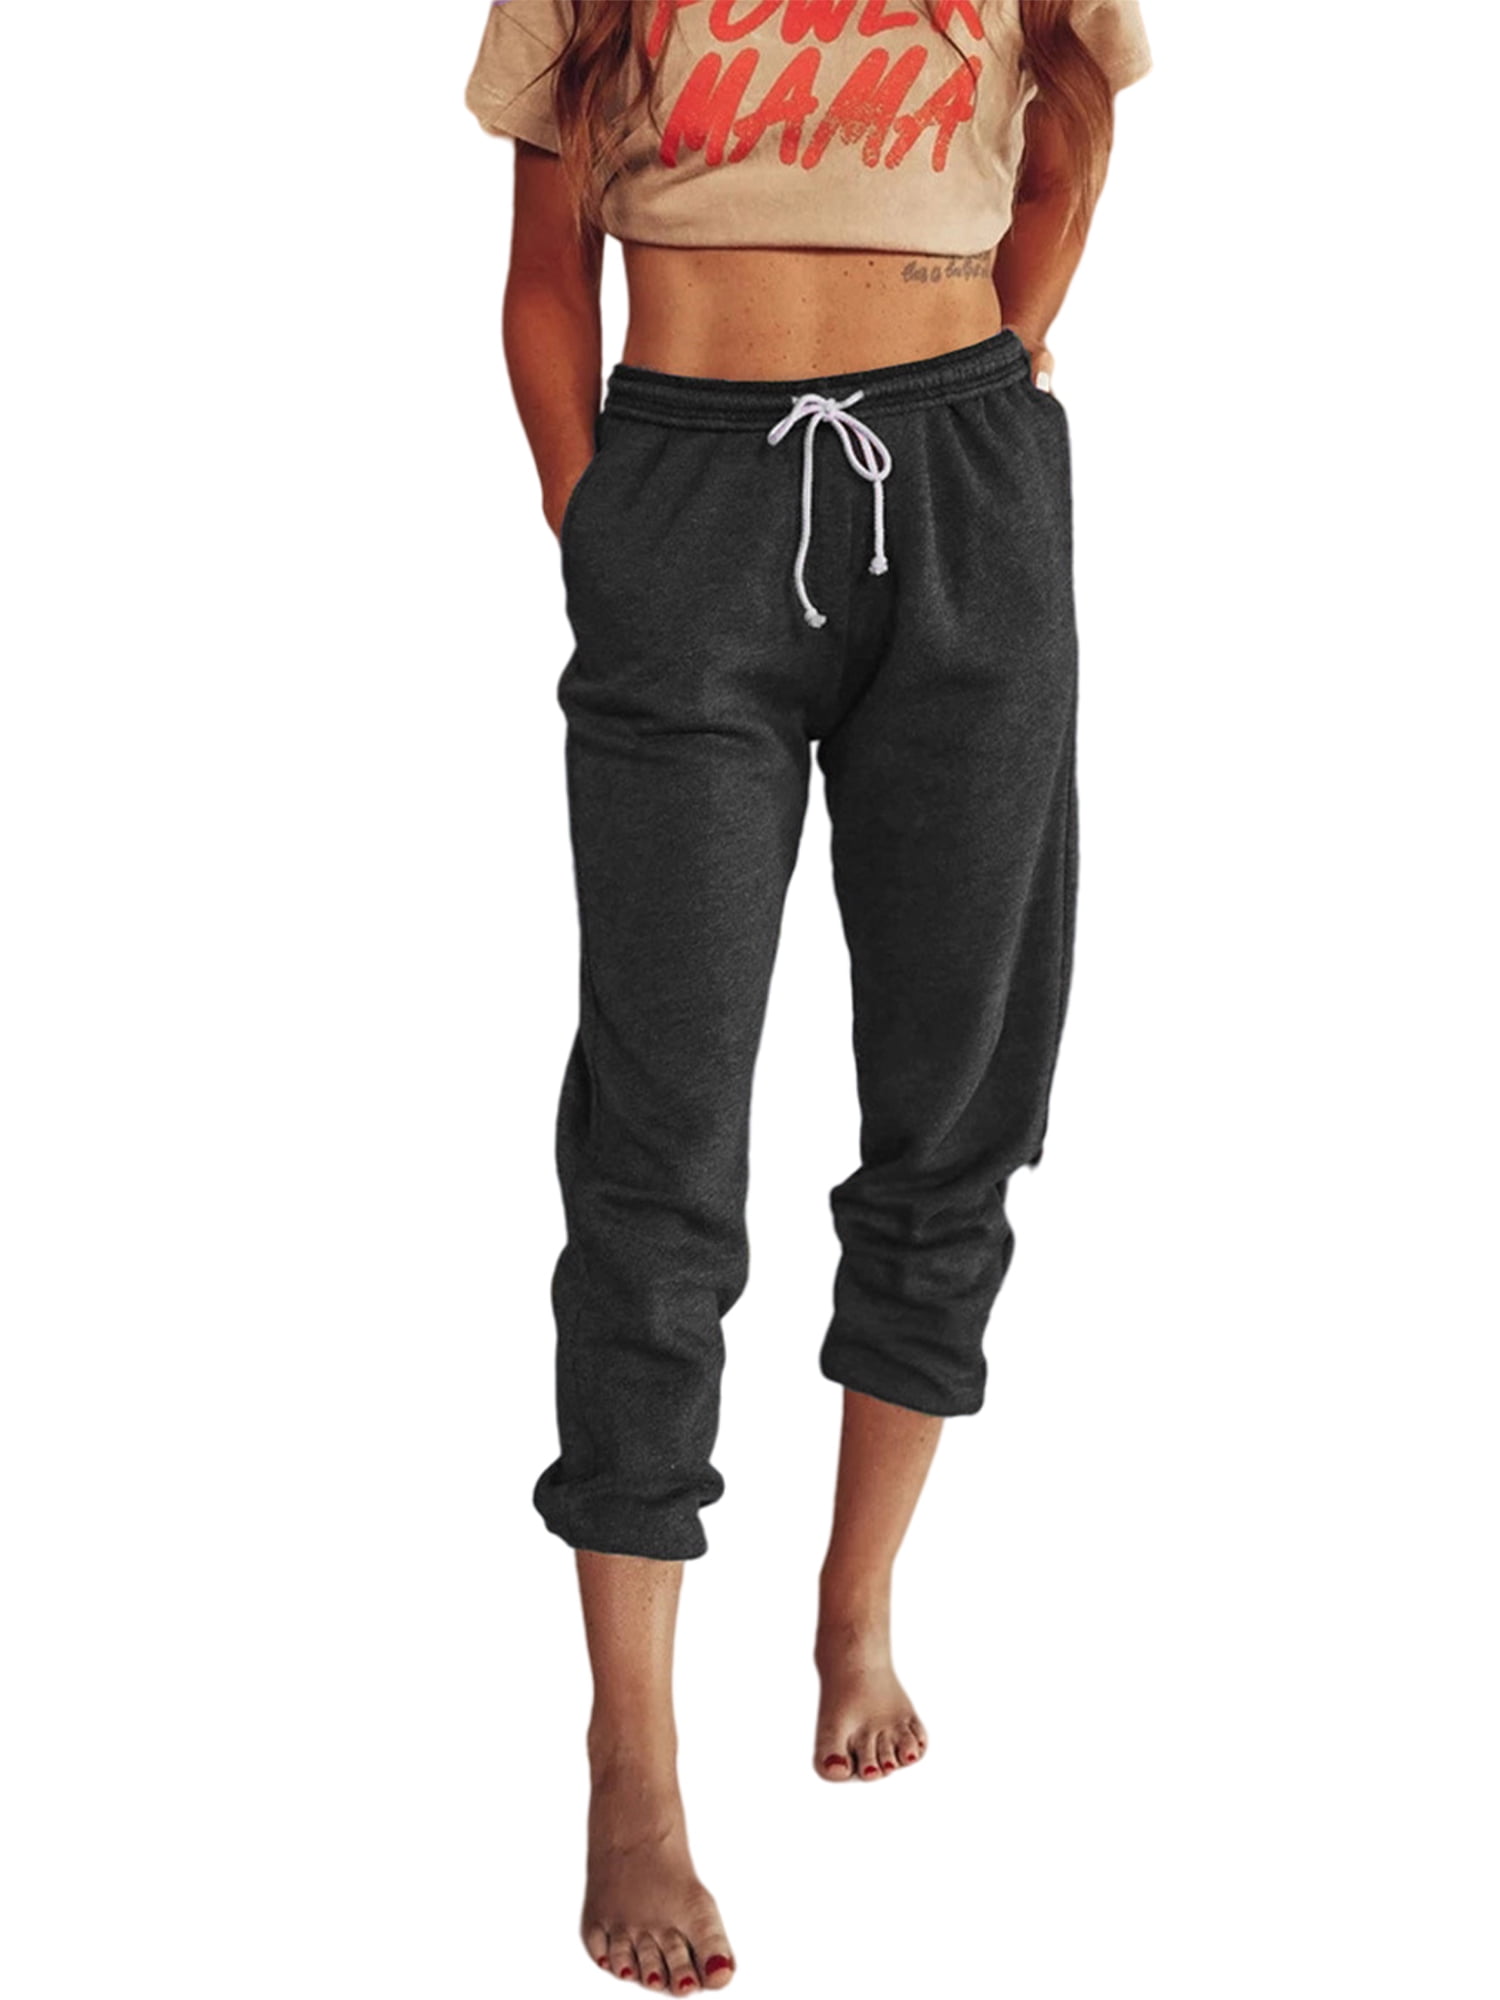 Frontwalk Womens Athletic Works Pants Pockets Drawstring Stretchy ...